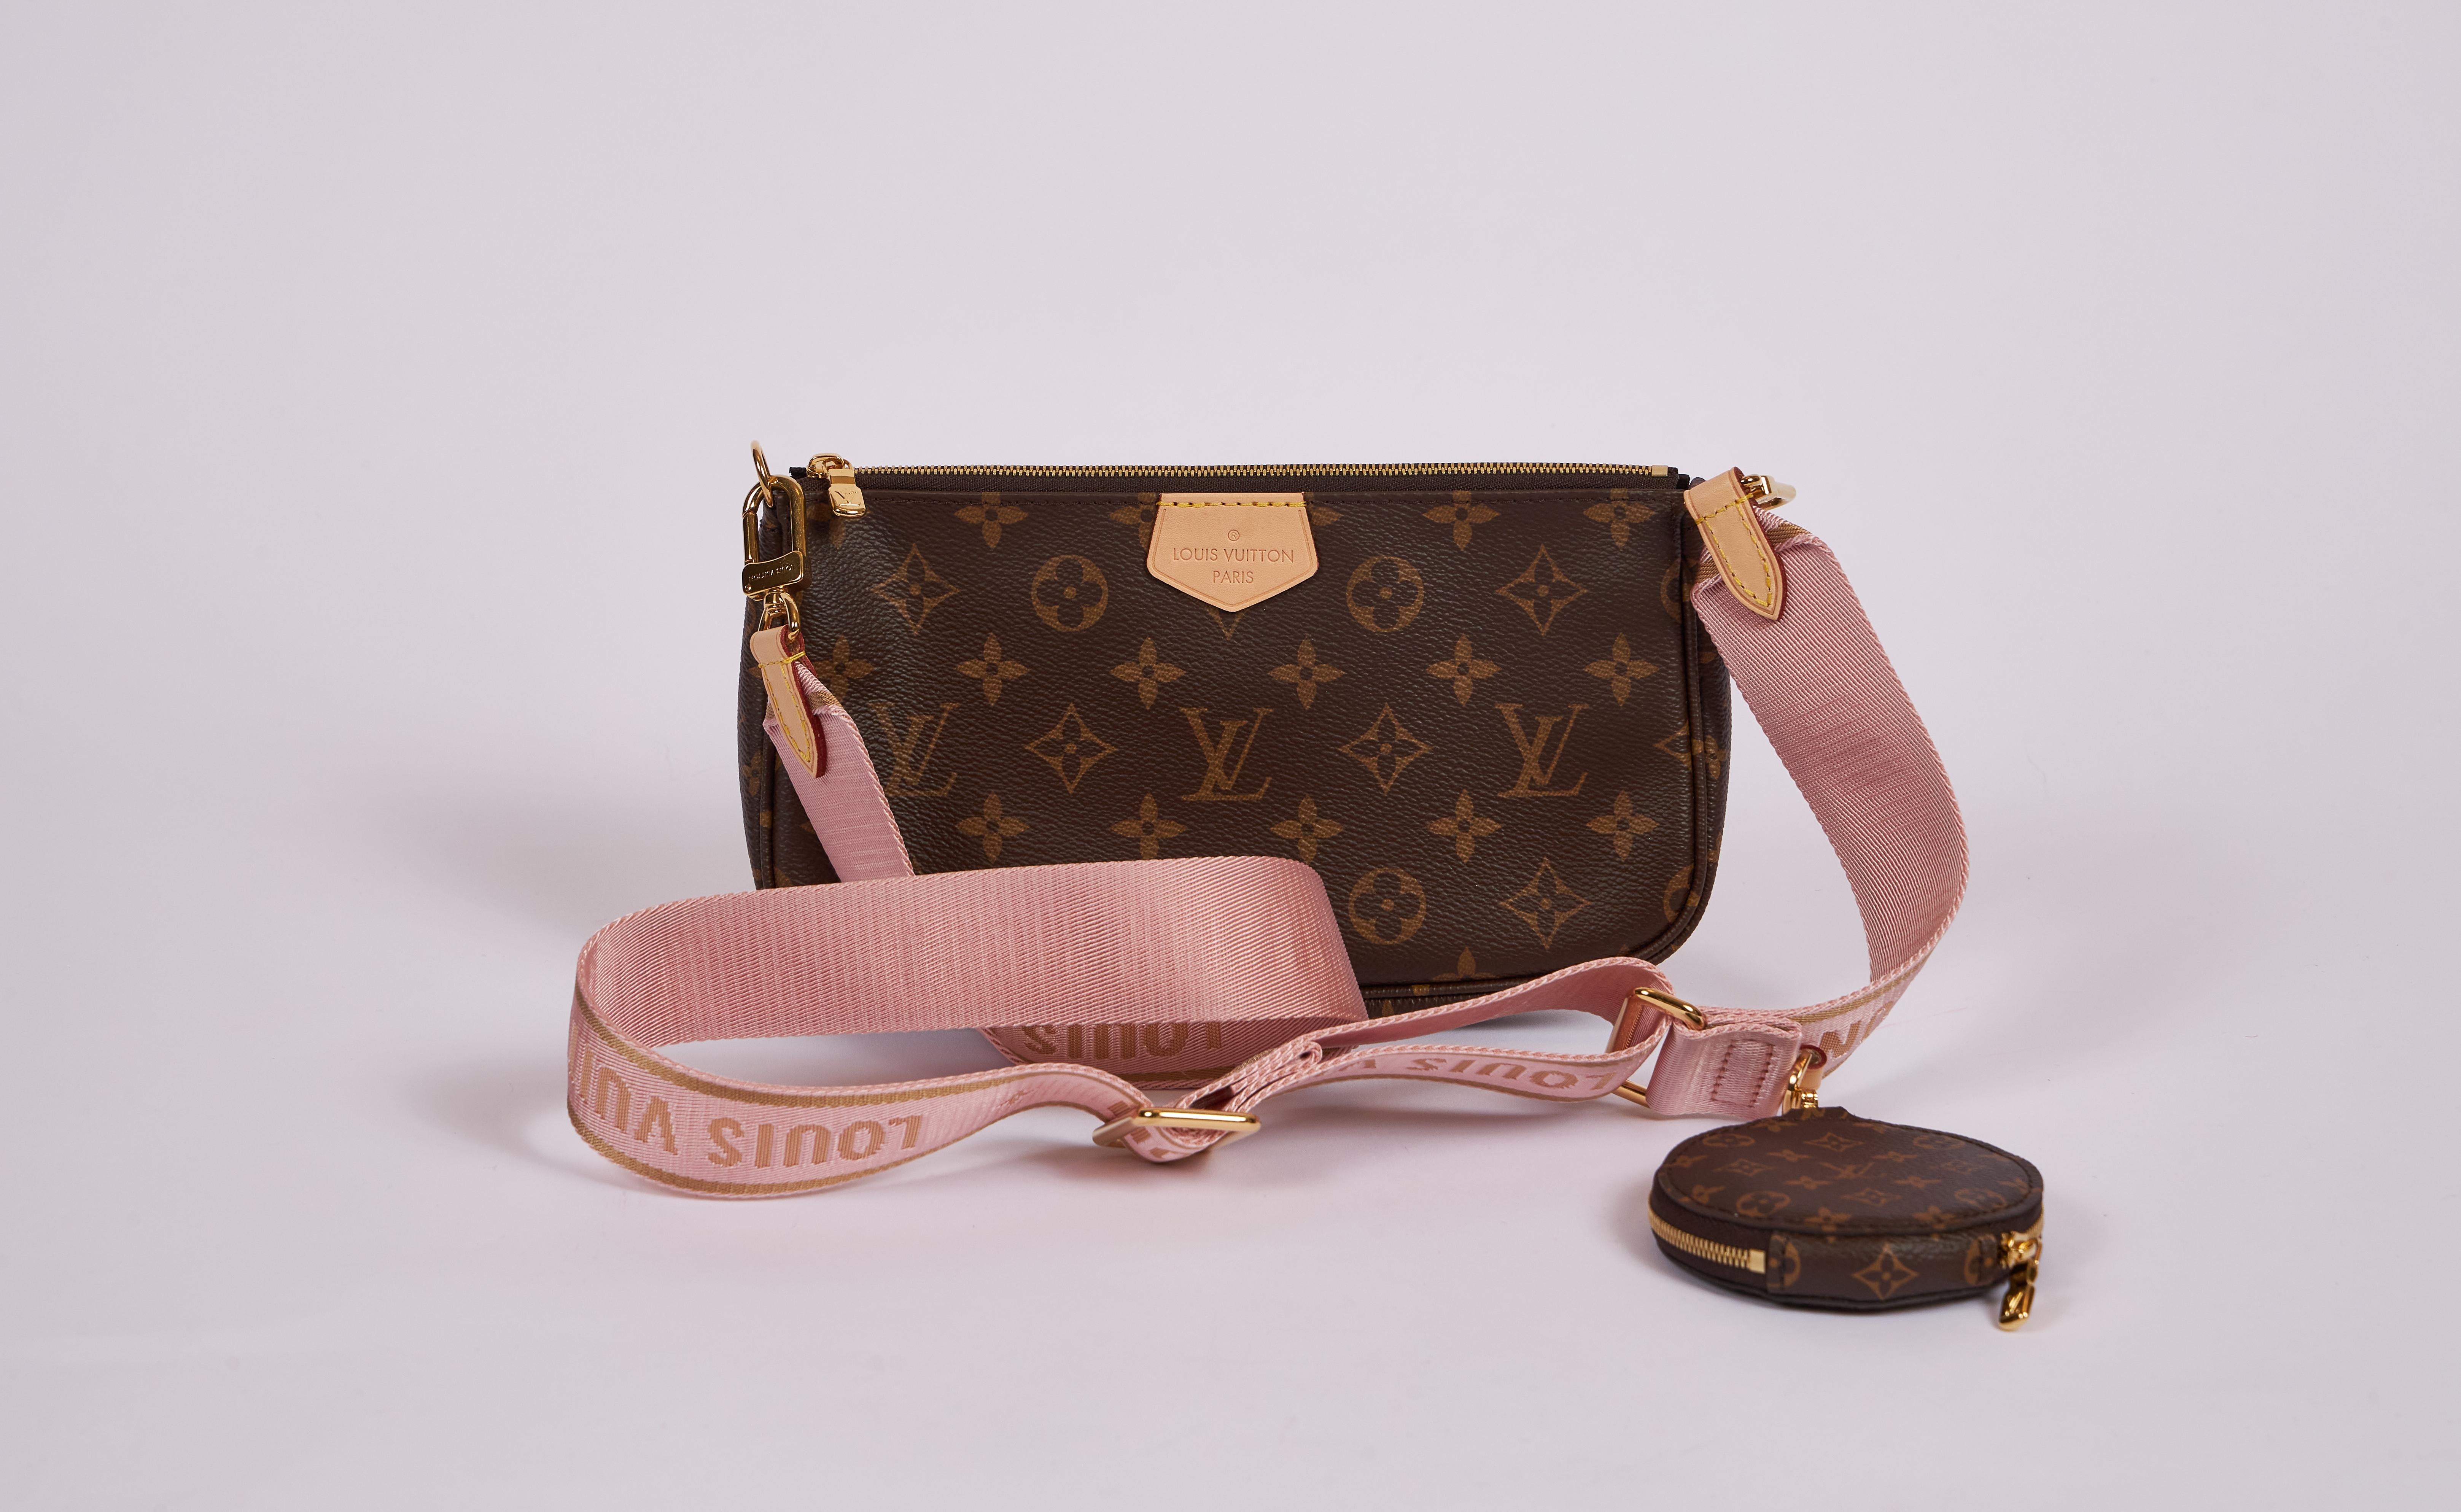 louis vuitton bag with pink strap price